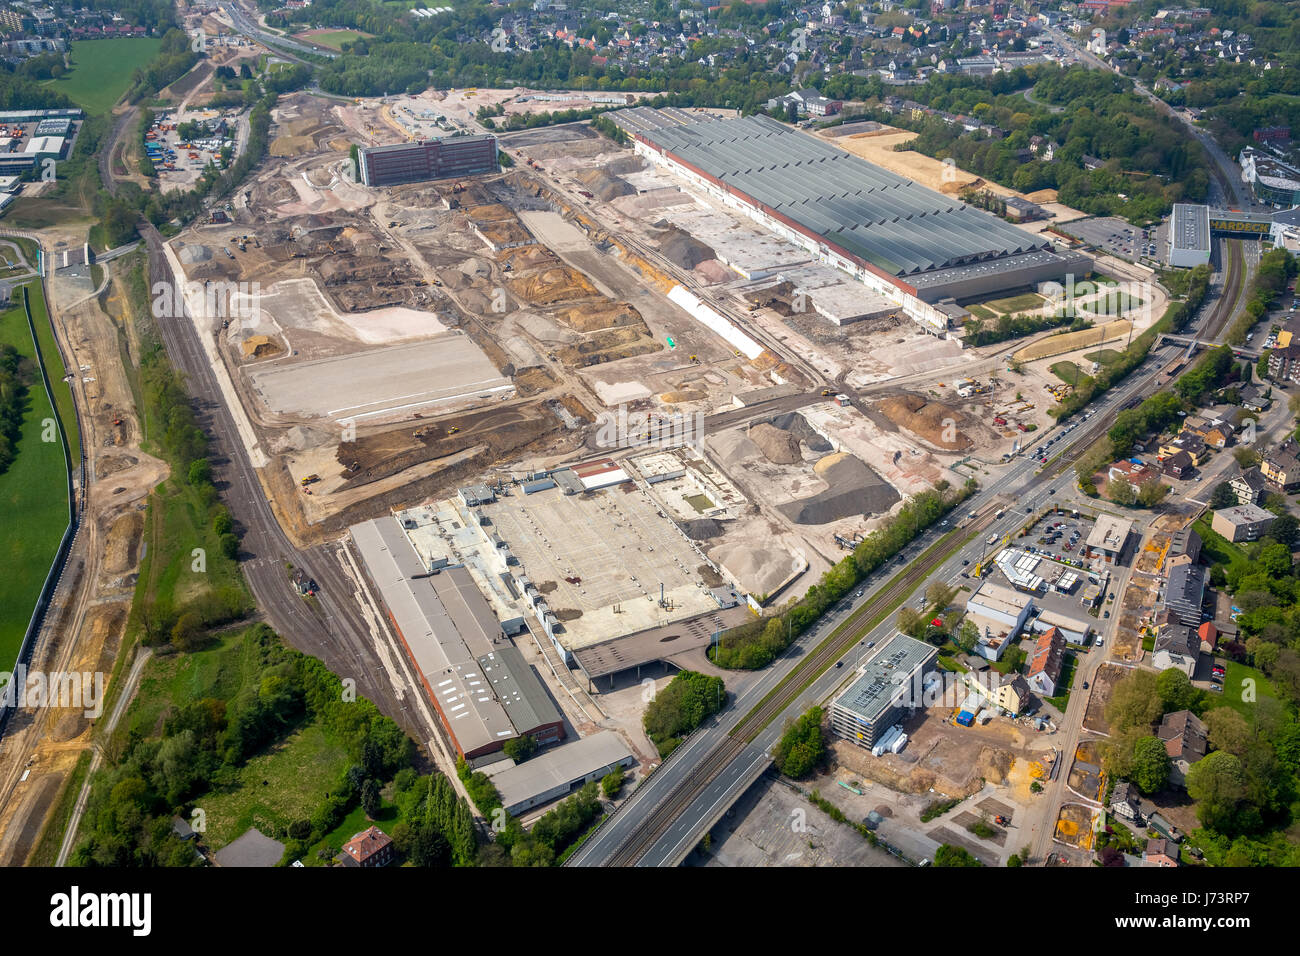 Lower OPEL factory 1, demolition of the southern factory halls, OPEL administration building, Bochum, Ruhr area, North Rhine-Westphalia, Germany, Euro Stock Photo